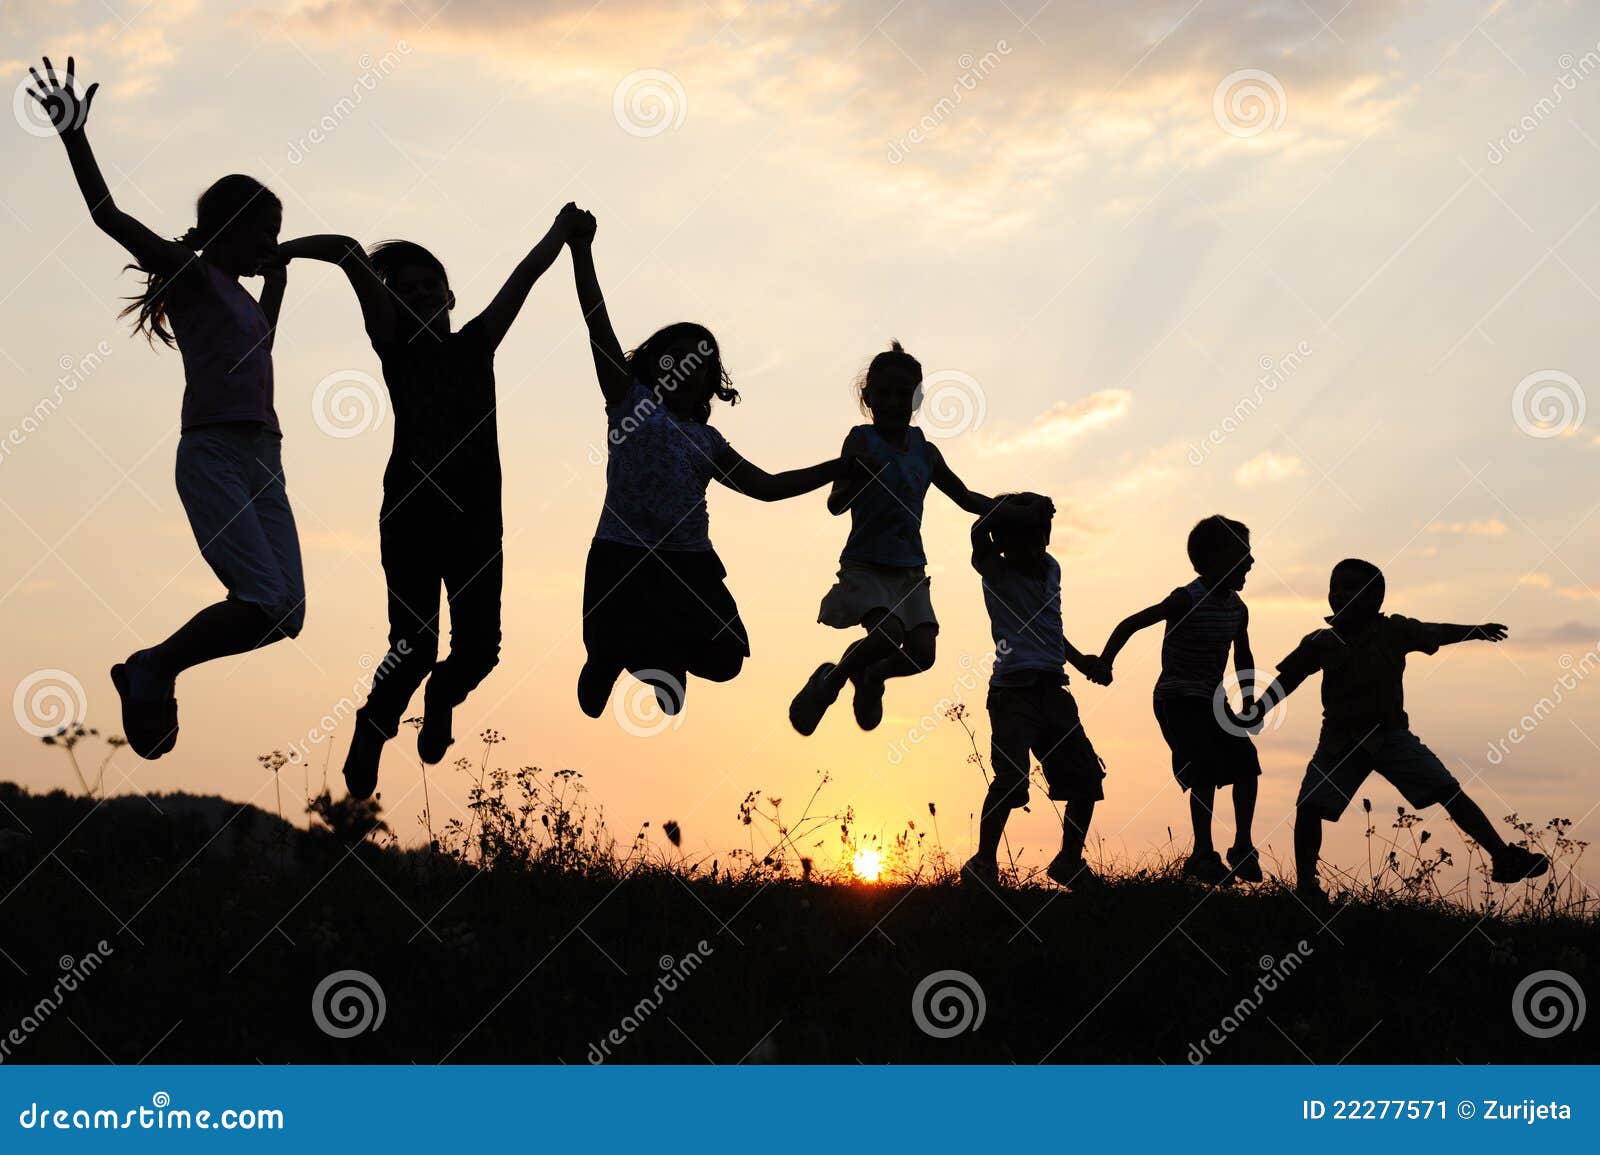 silhouette, group of happy children